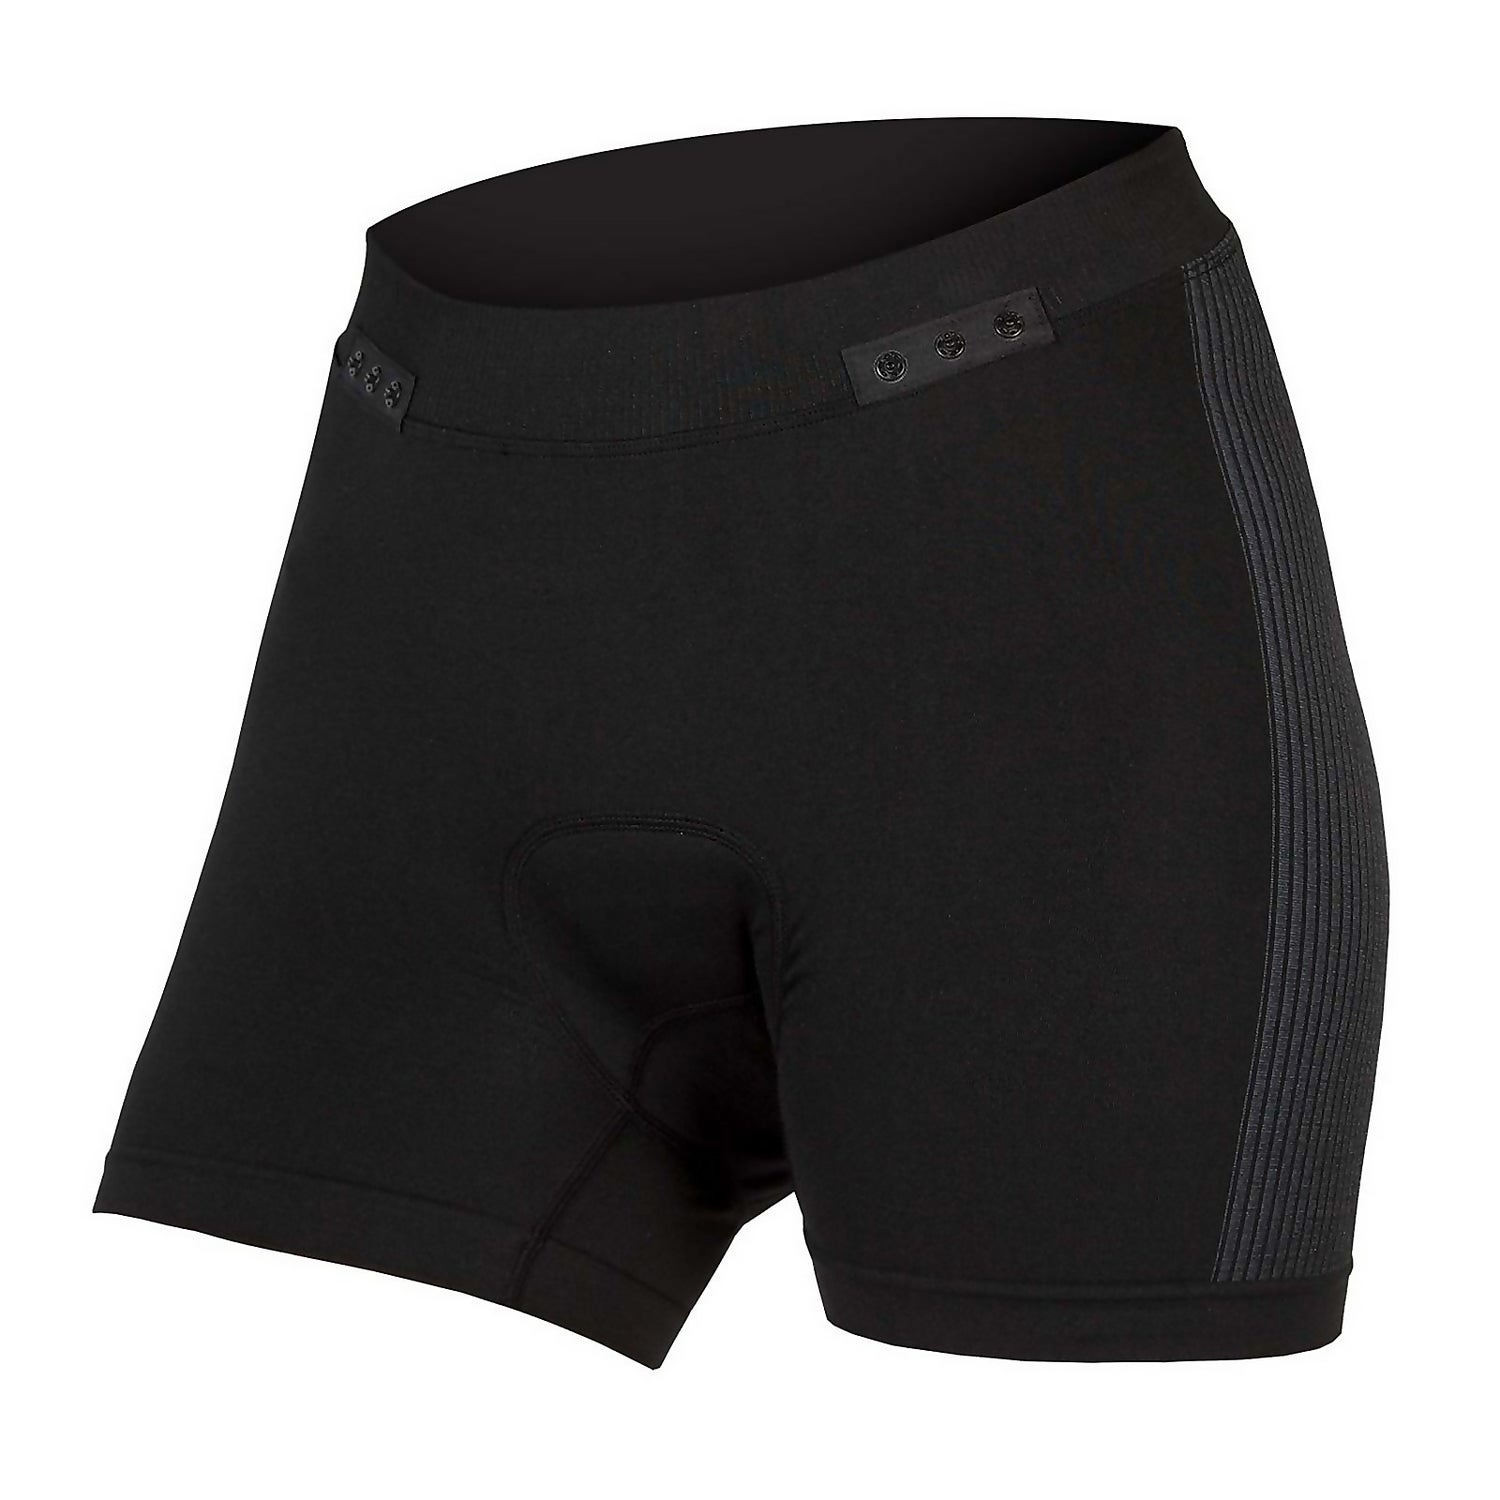 Women's Engineered Padded Boxer with Clickfast - Black - XL